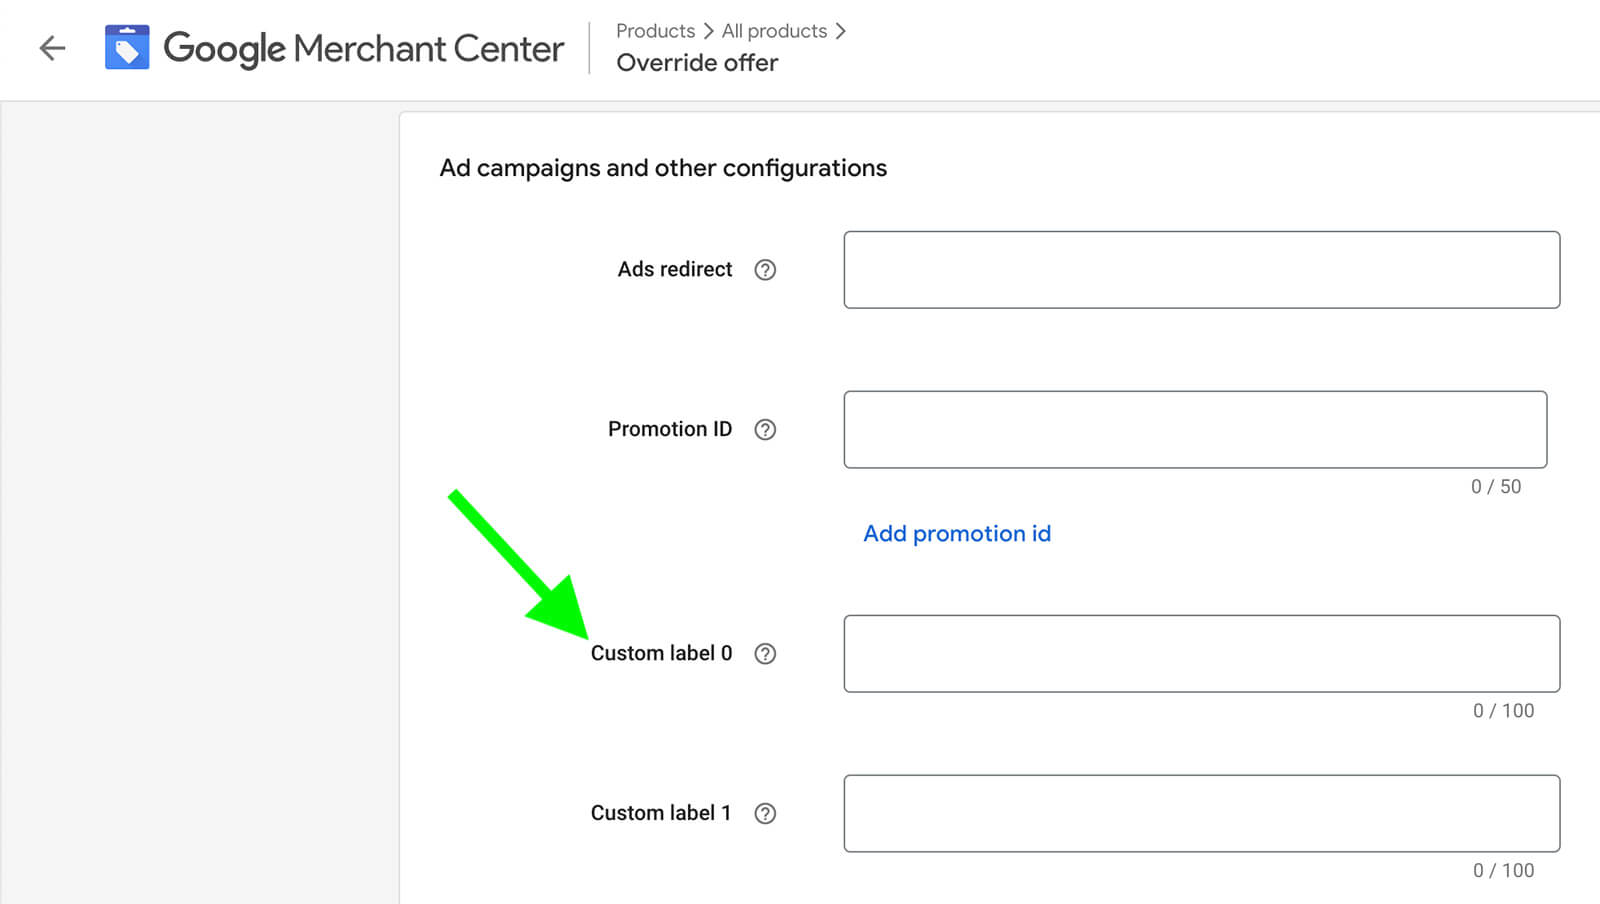 how-to-set-up-a-product-feed-in-google-merchant-center-using-youtube-ad-campaign-for-shoppable-ad-campaigns-and-other-configurations-add-five-custom-labels-add-products-to-ads-example-12